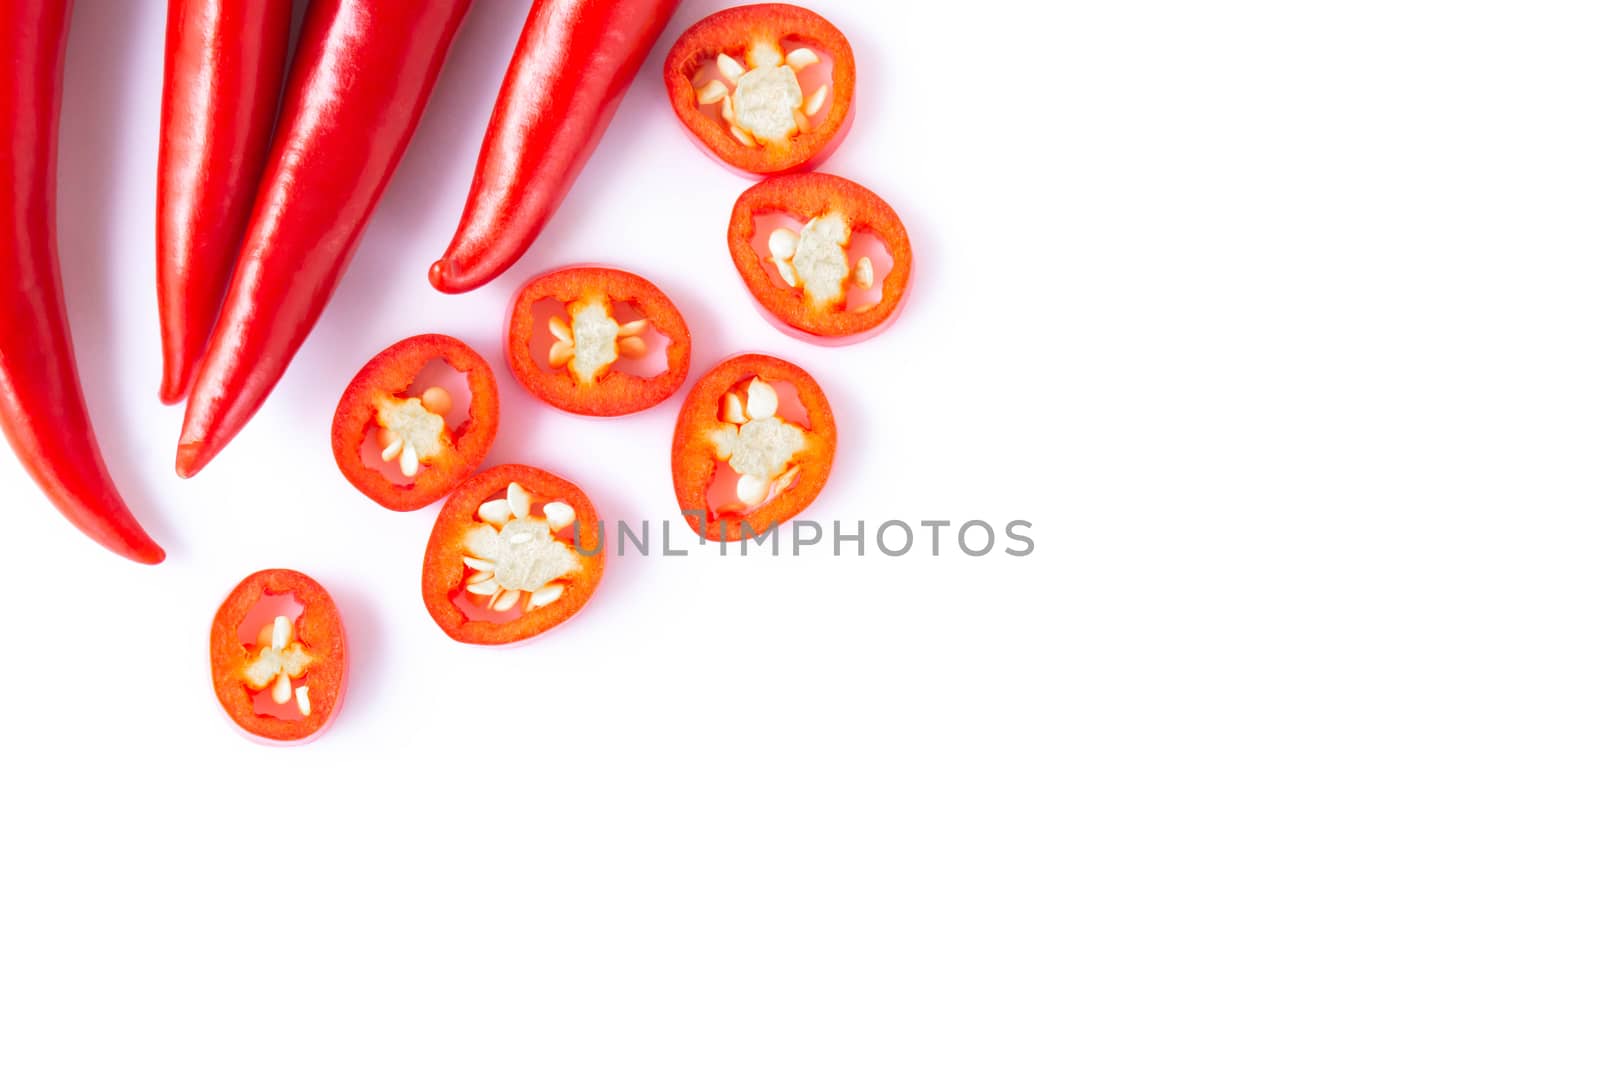 Red chili pepper sliced on white background, raw food ingredient concept